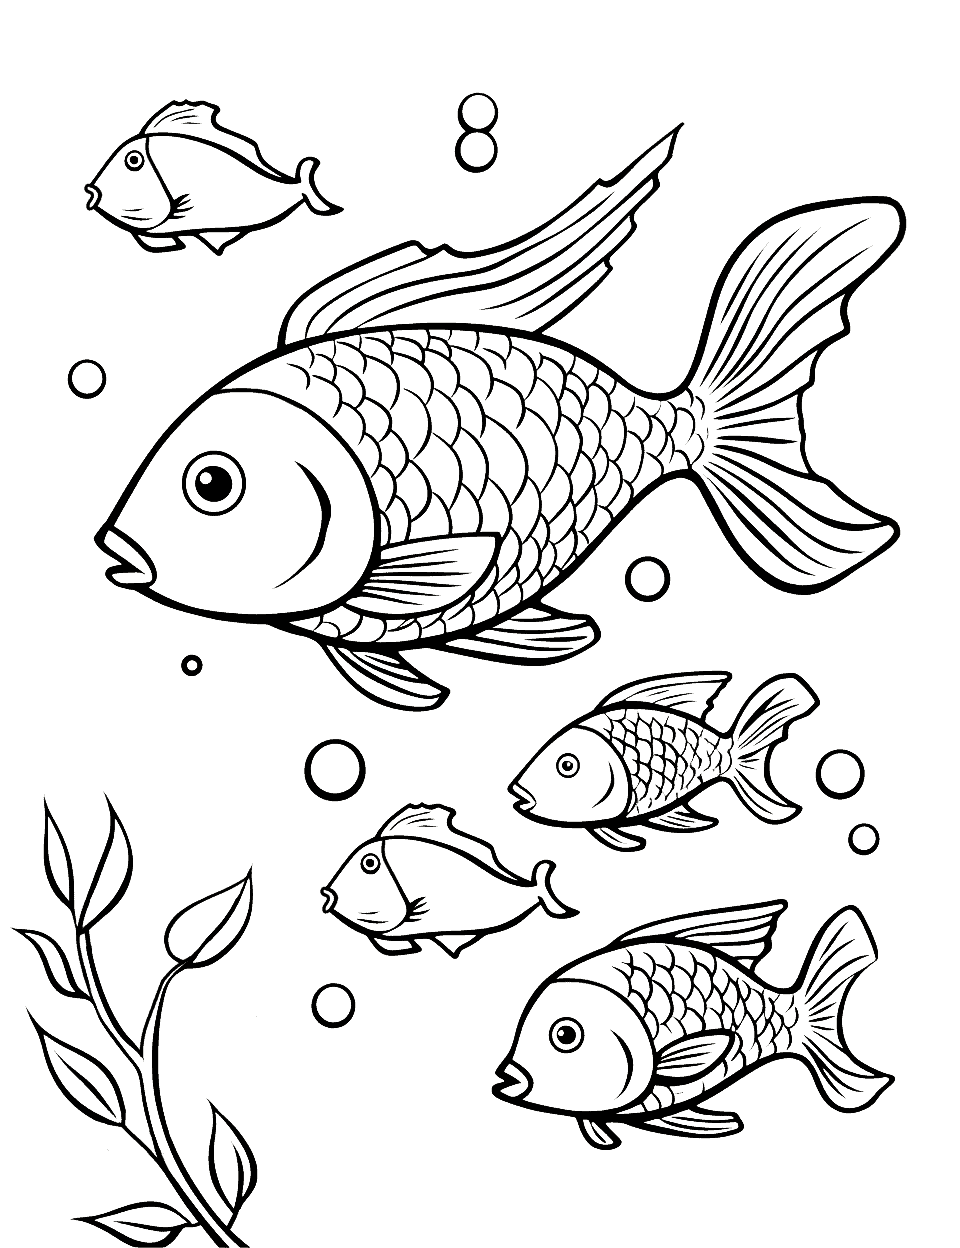 Freshwater Fish Expedition Coloring Page - Various freshwater fish swimming together.